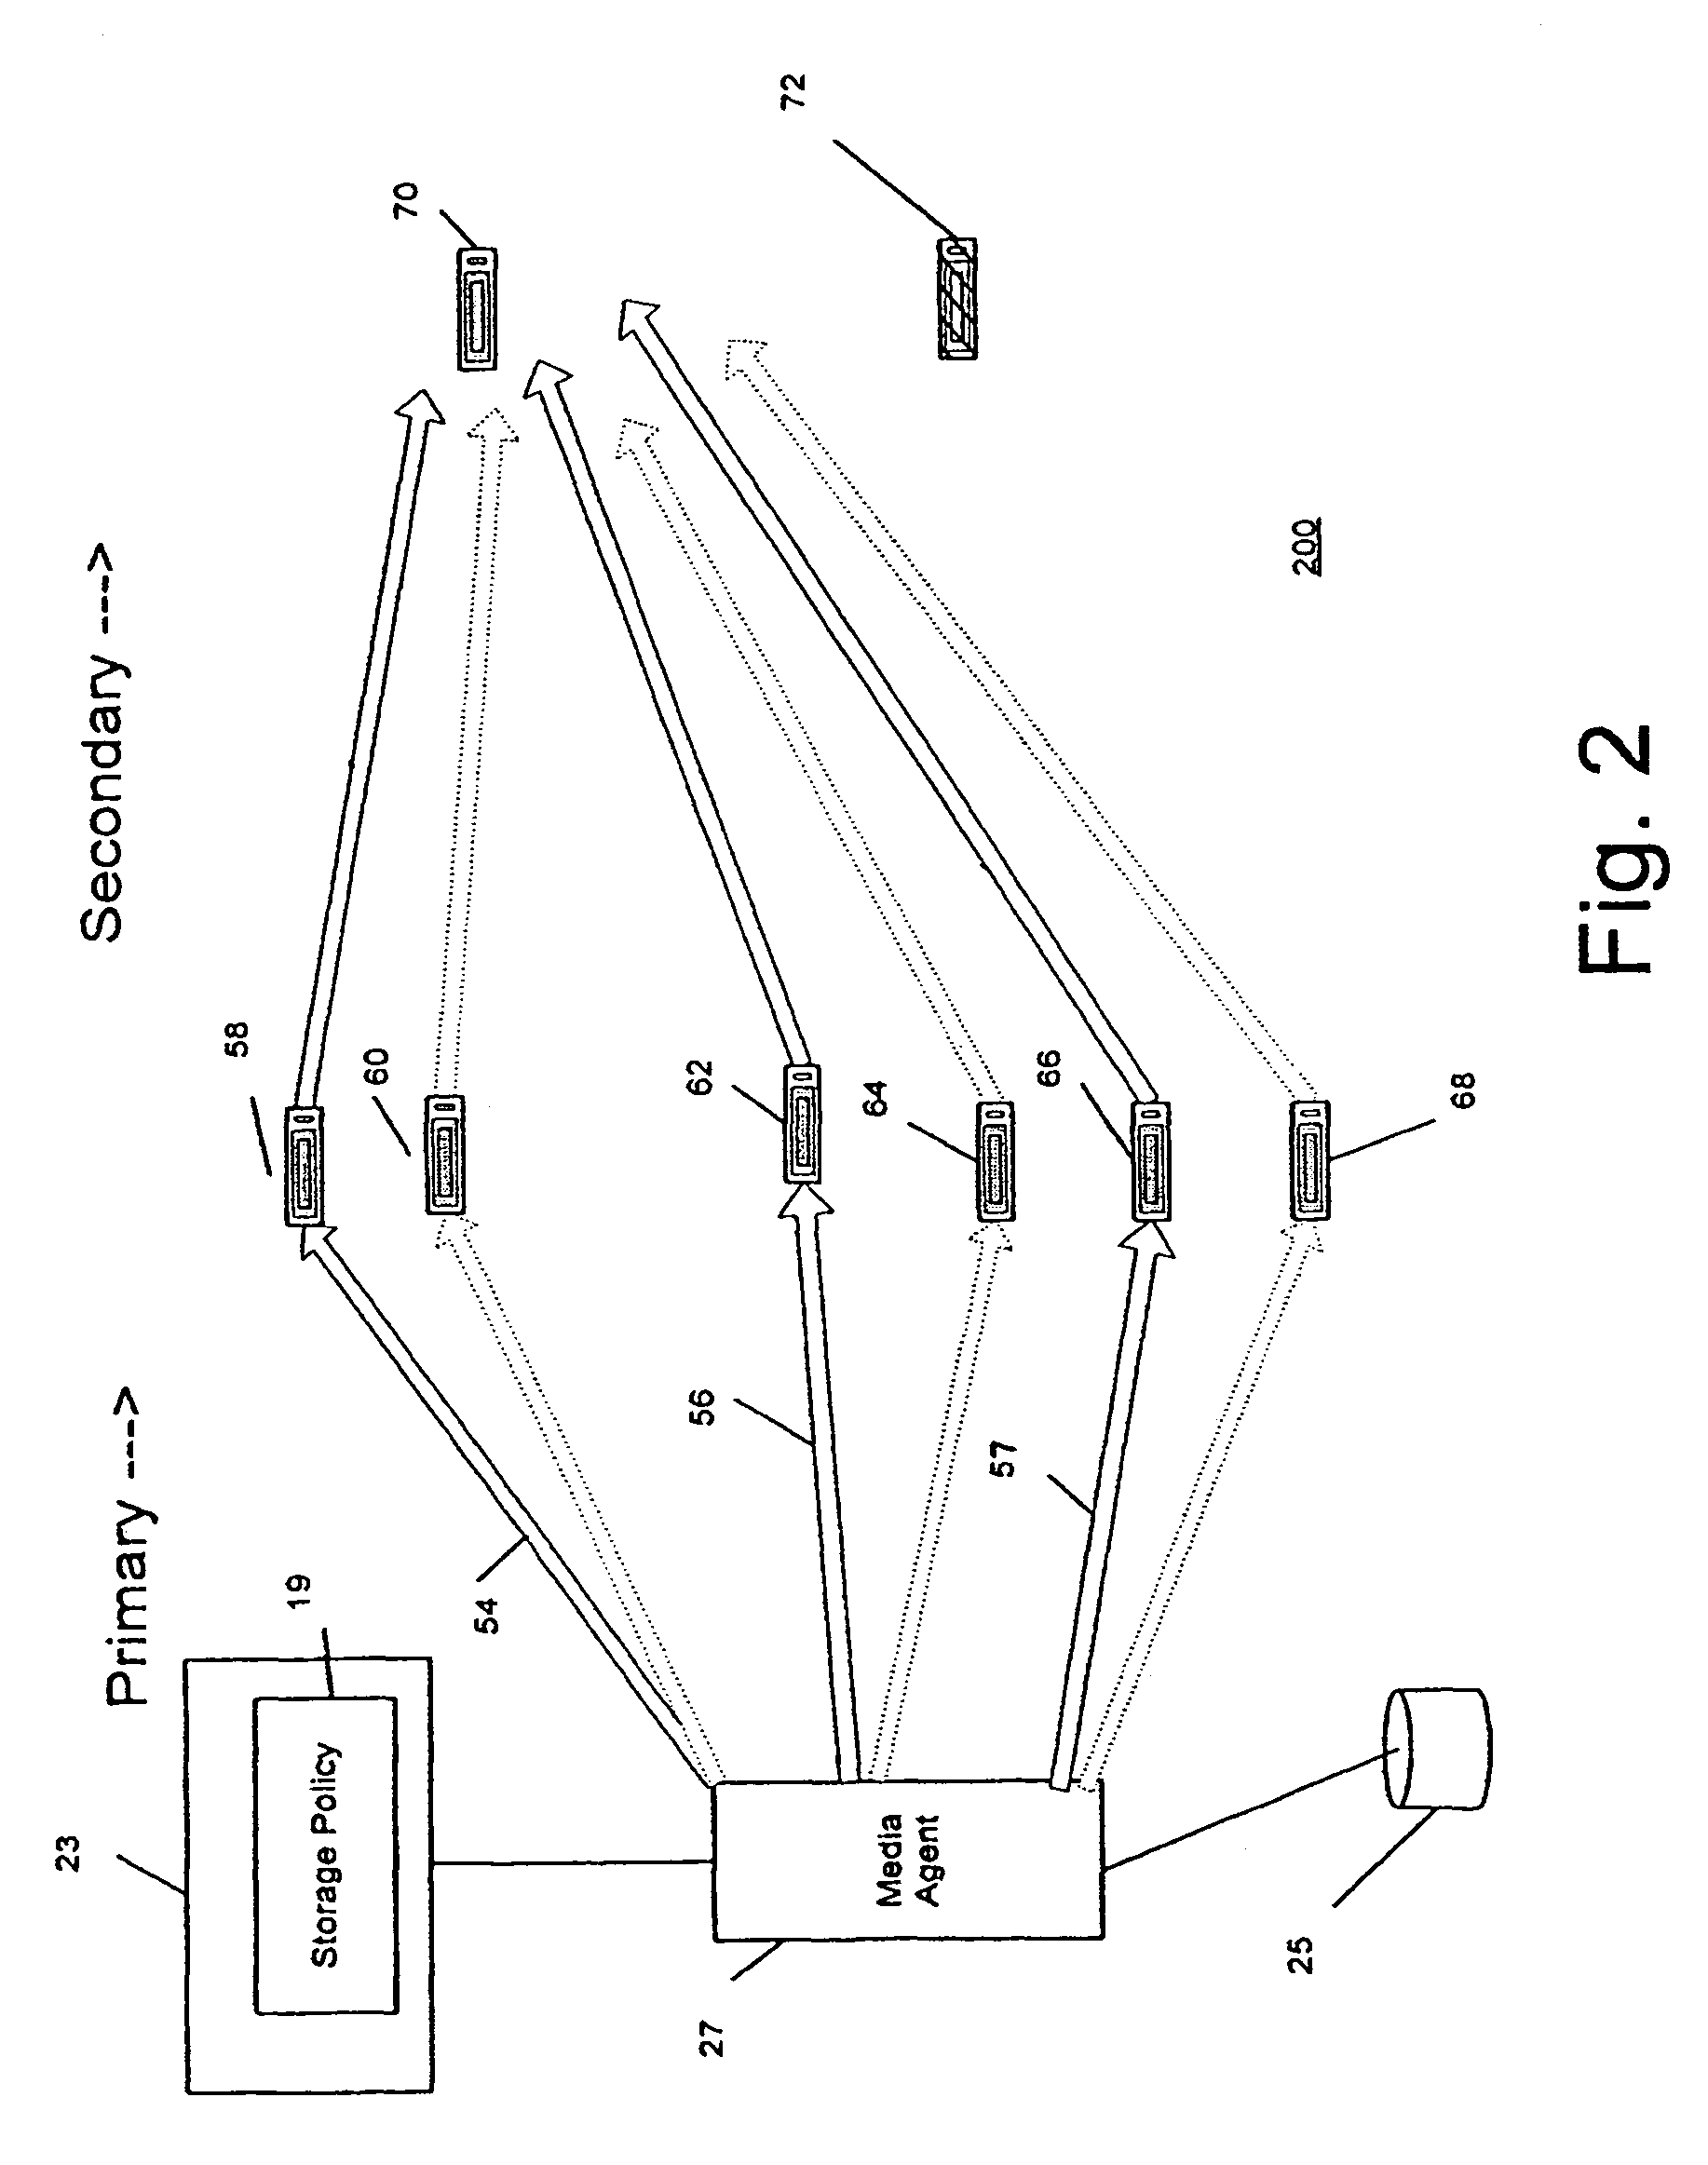 Combined stream auxiliary copy system and method